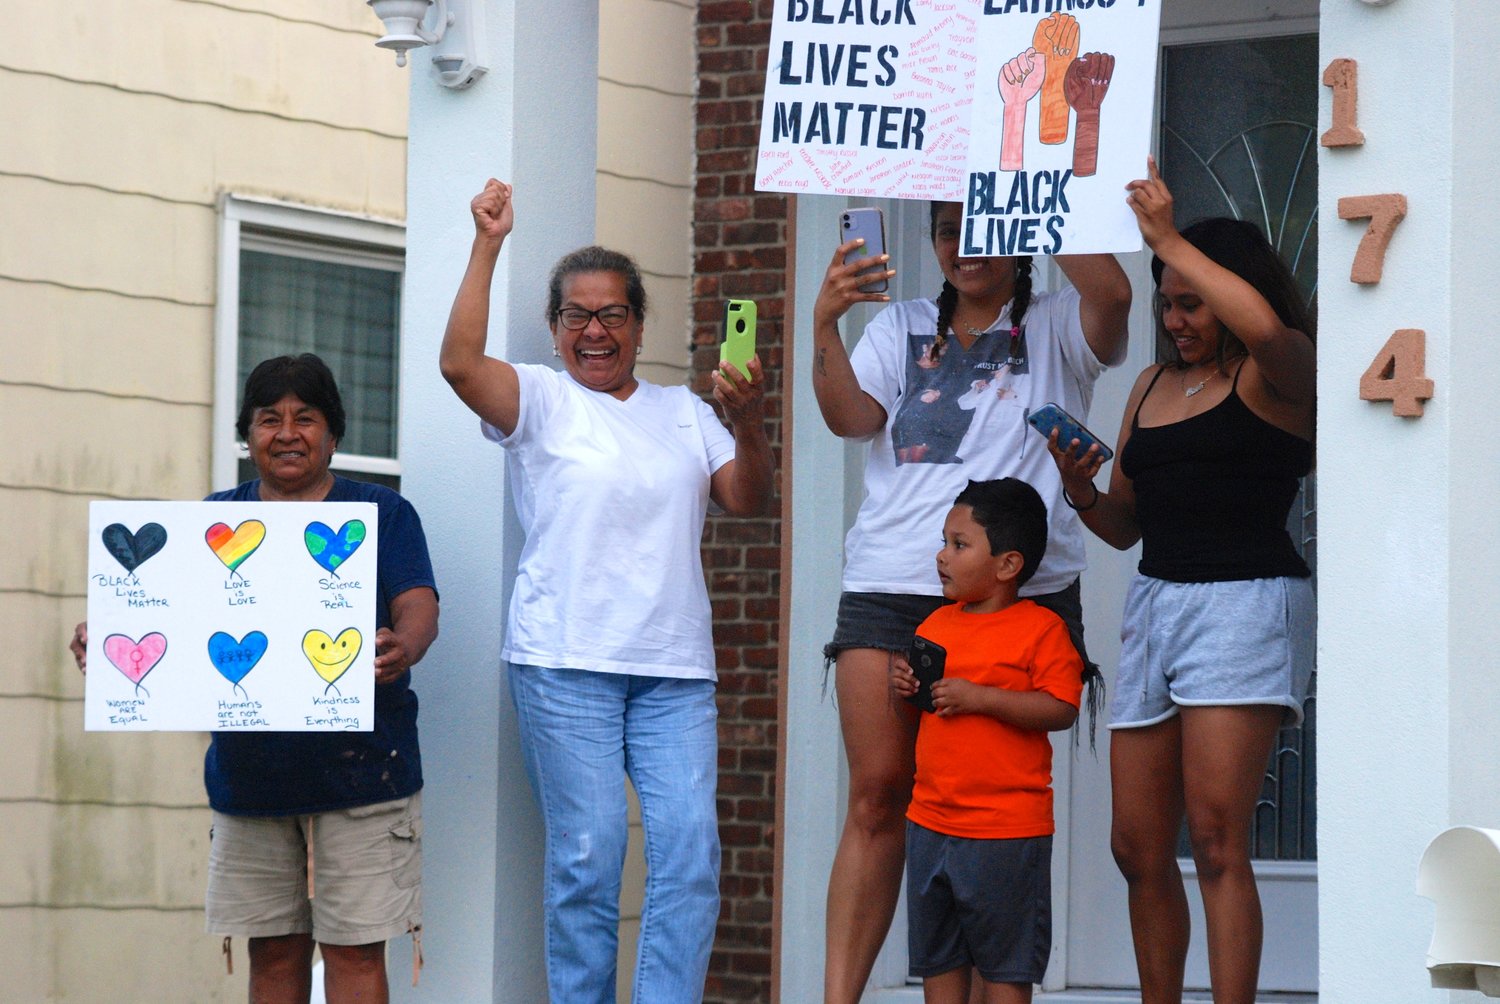 The Cordova family, on Babylon Turnpike in Merrick, cheered on the protesters.